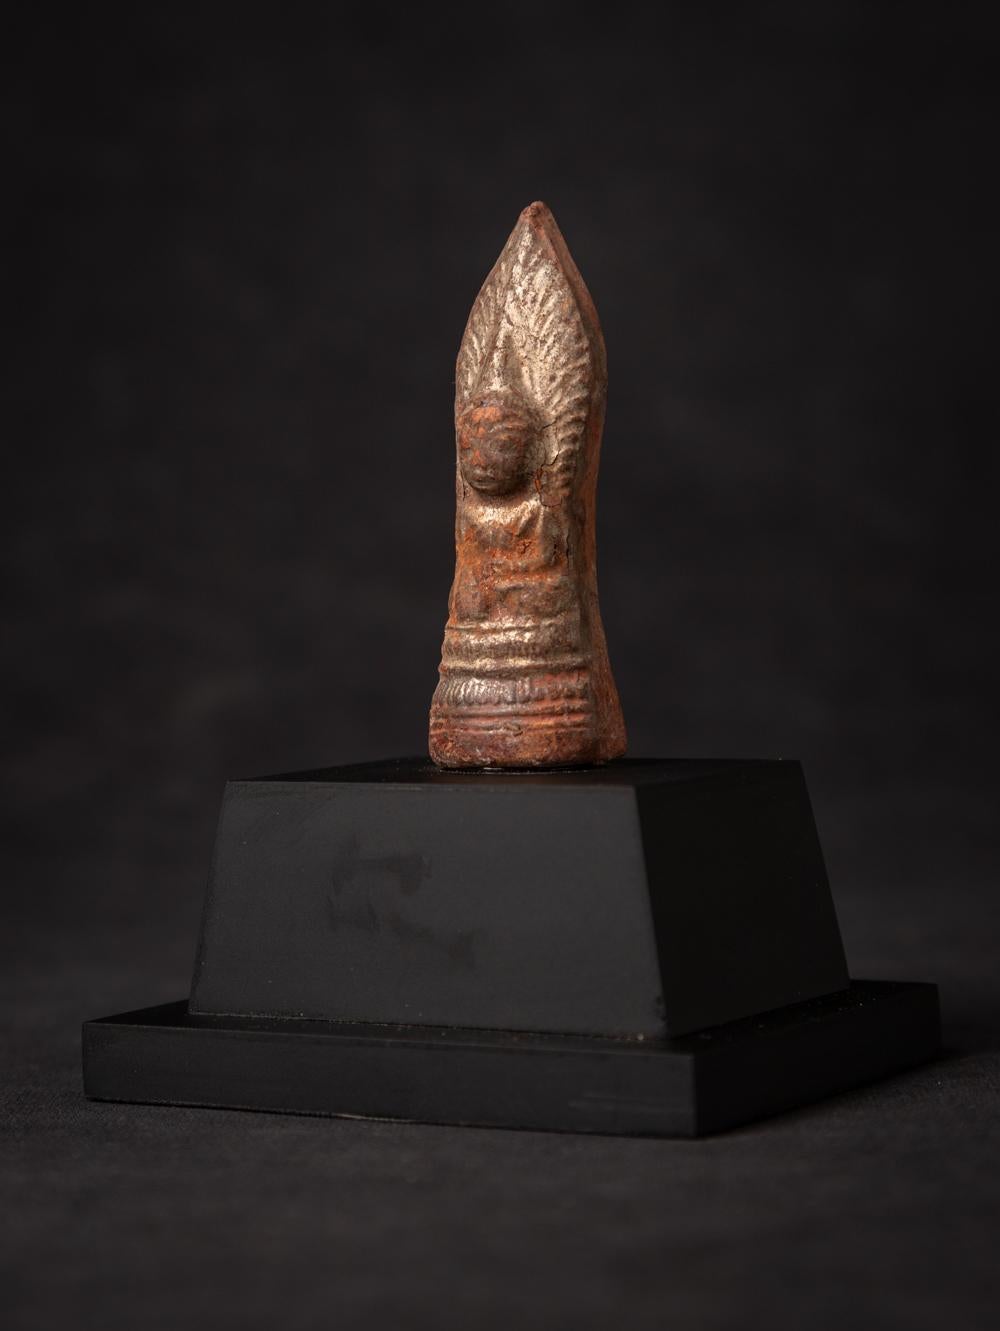 Antique Burmese Buddha amulet
Material: Terracotta
11,5 cm high
9,2 cm wide and 7,2 cm deep
Just the amulet (without the base) is 7,5 cm high
Shan (Tai Yai) style
Bhumisparsha mudra
19th century
Weight: 163 grams
Originating from Burma
Nr: AML-10